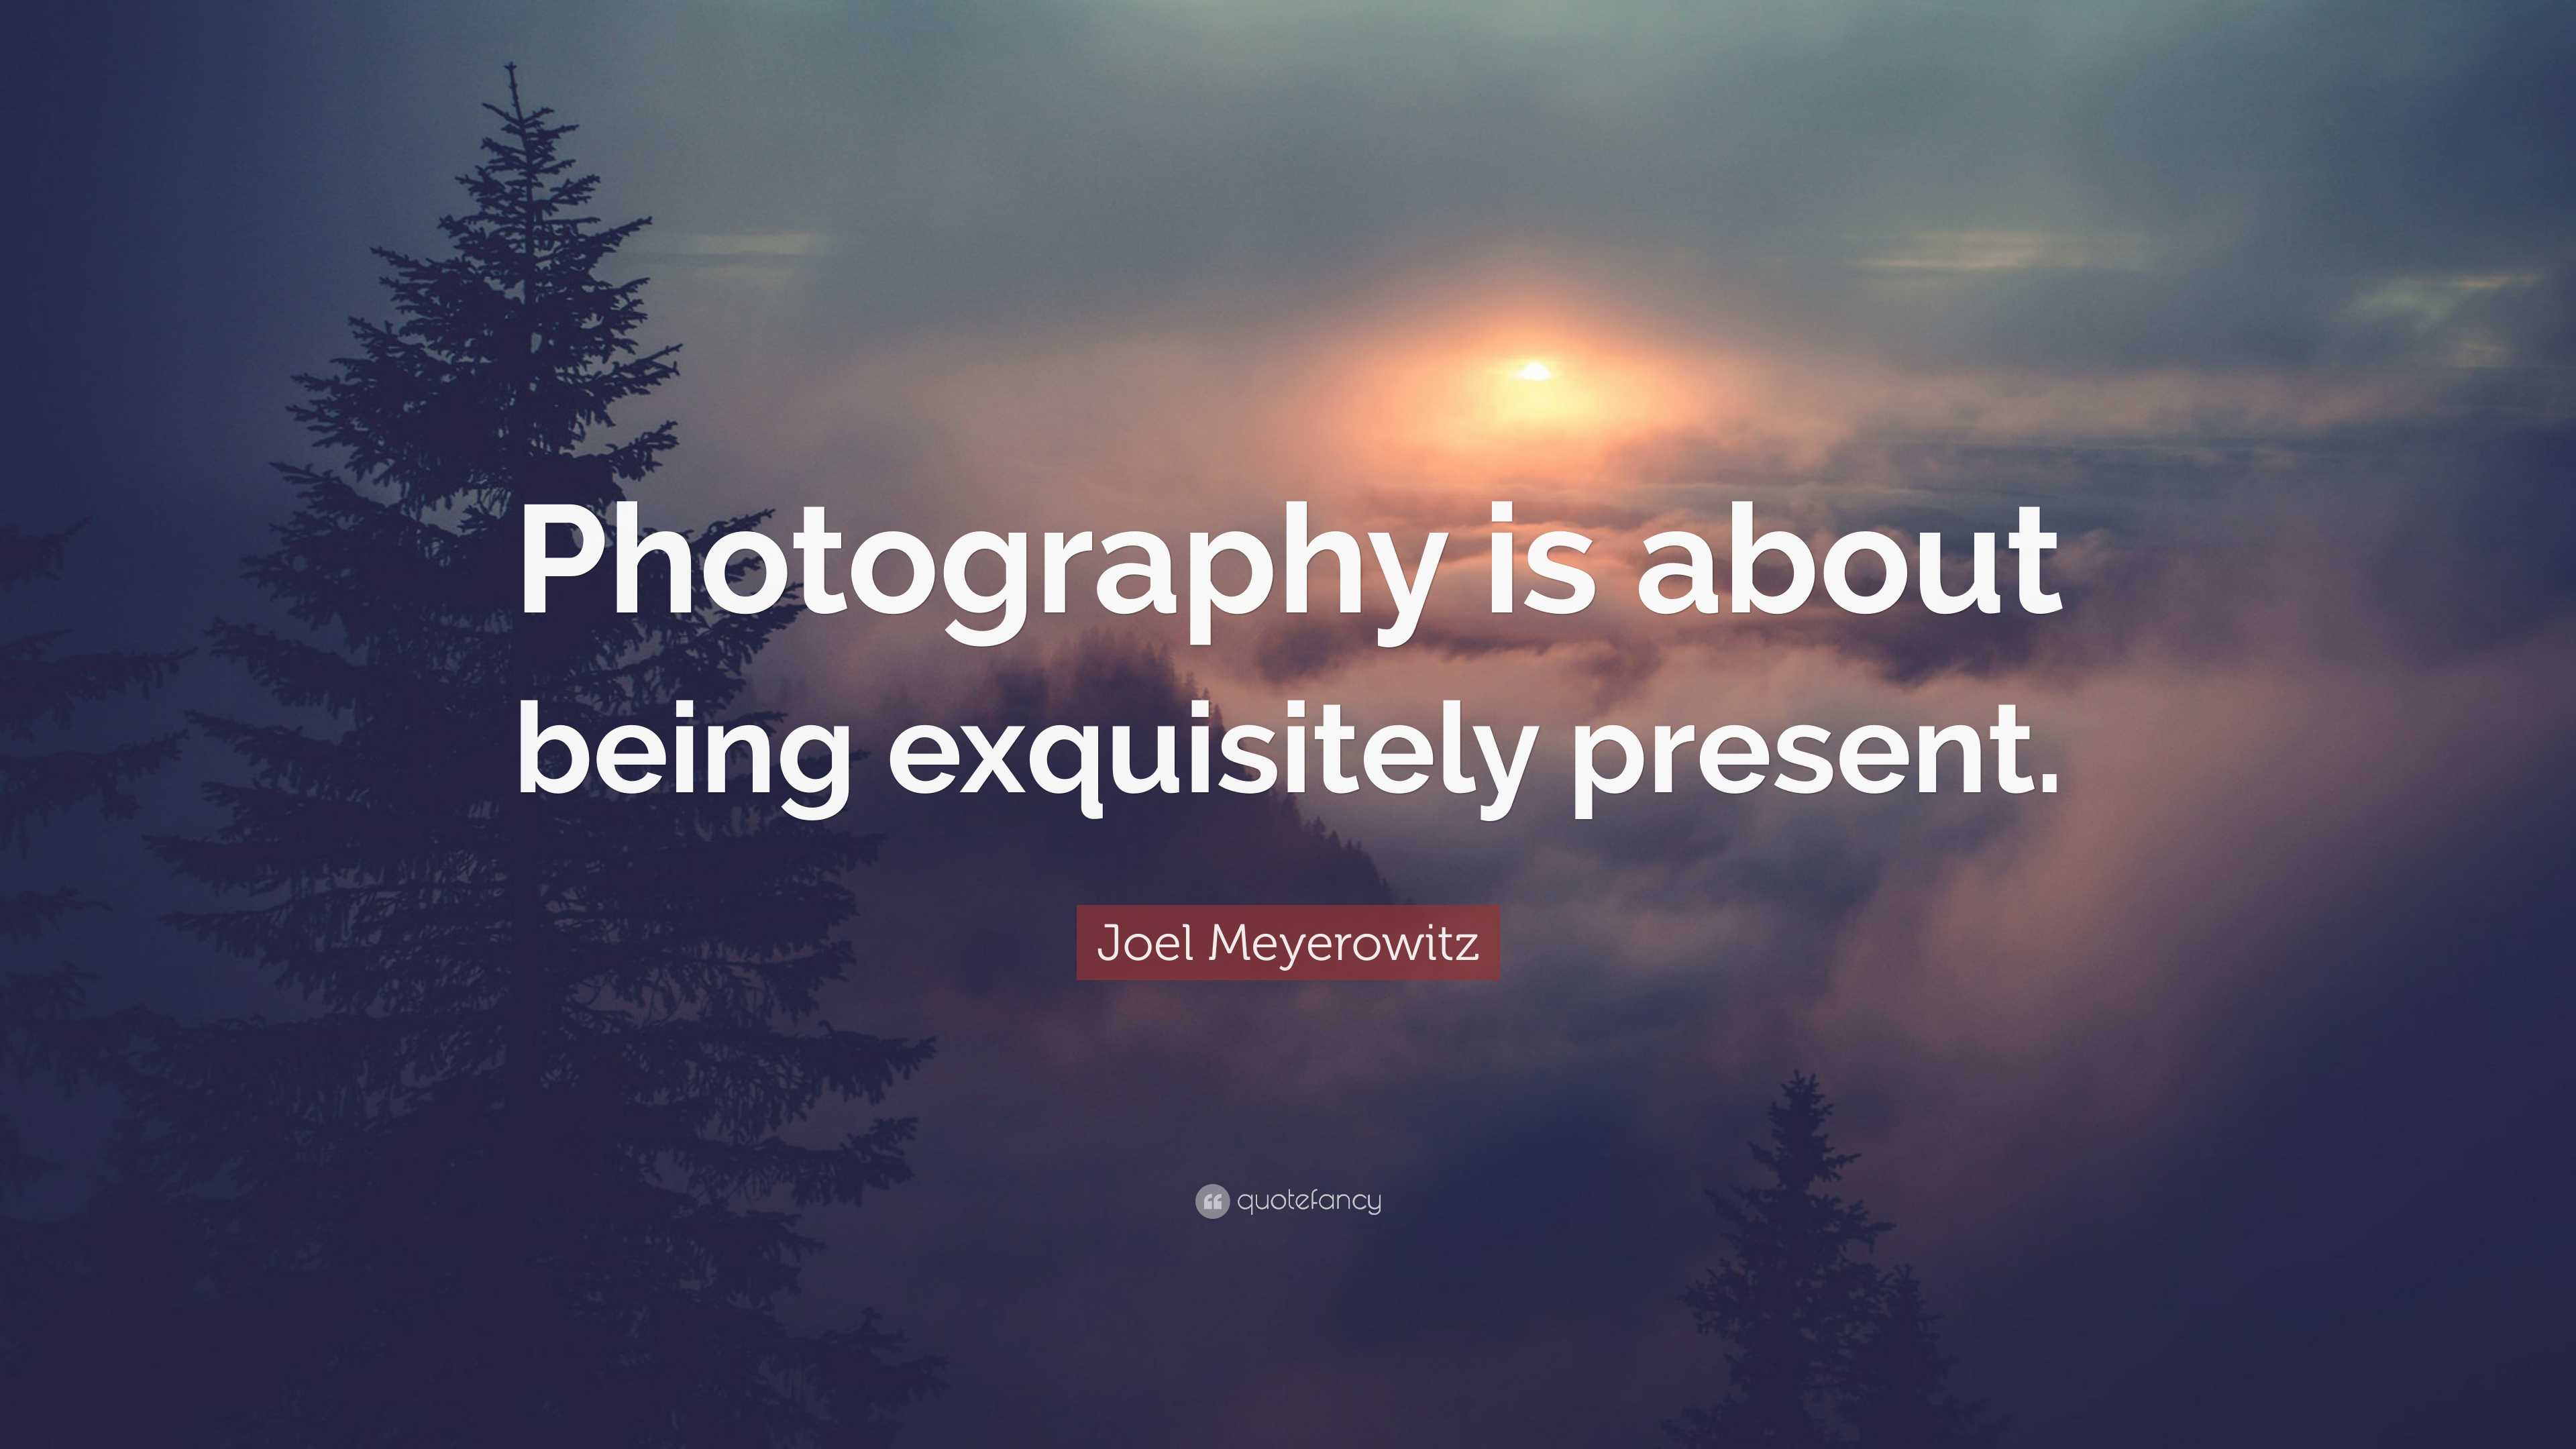 Joel Meyerowitz Quote: “Photography is about being exquisitely present.”